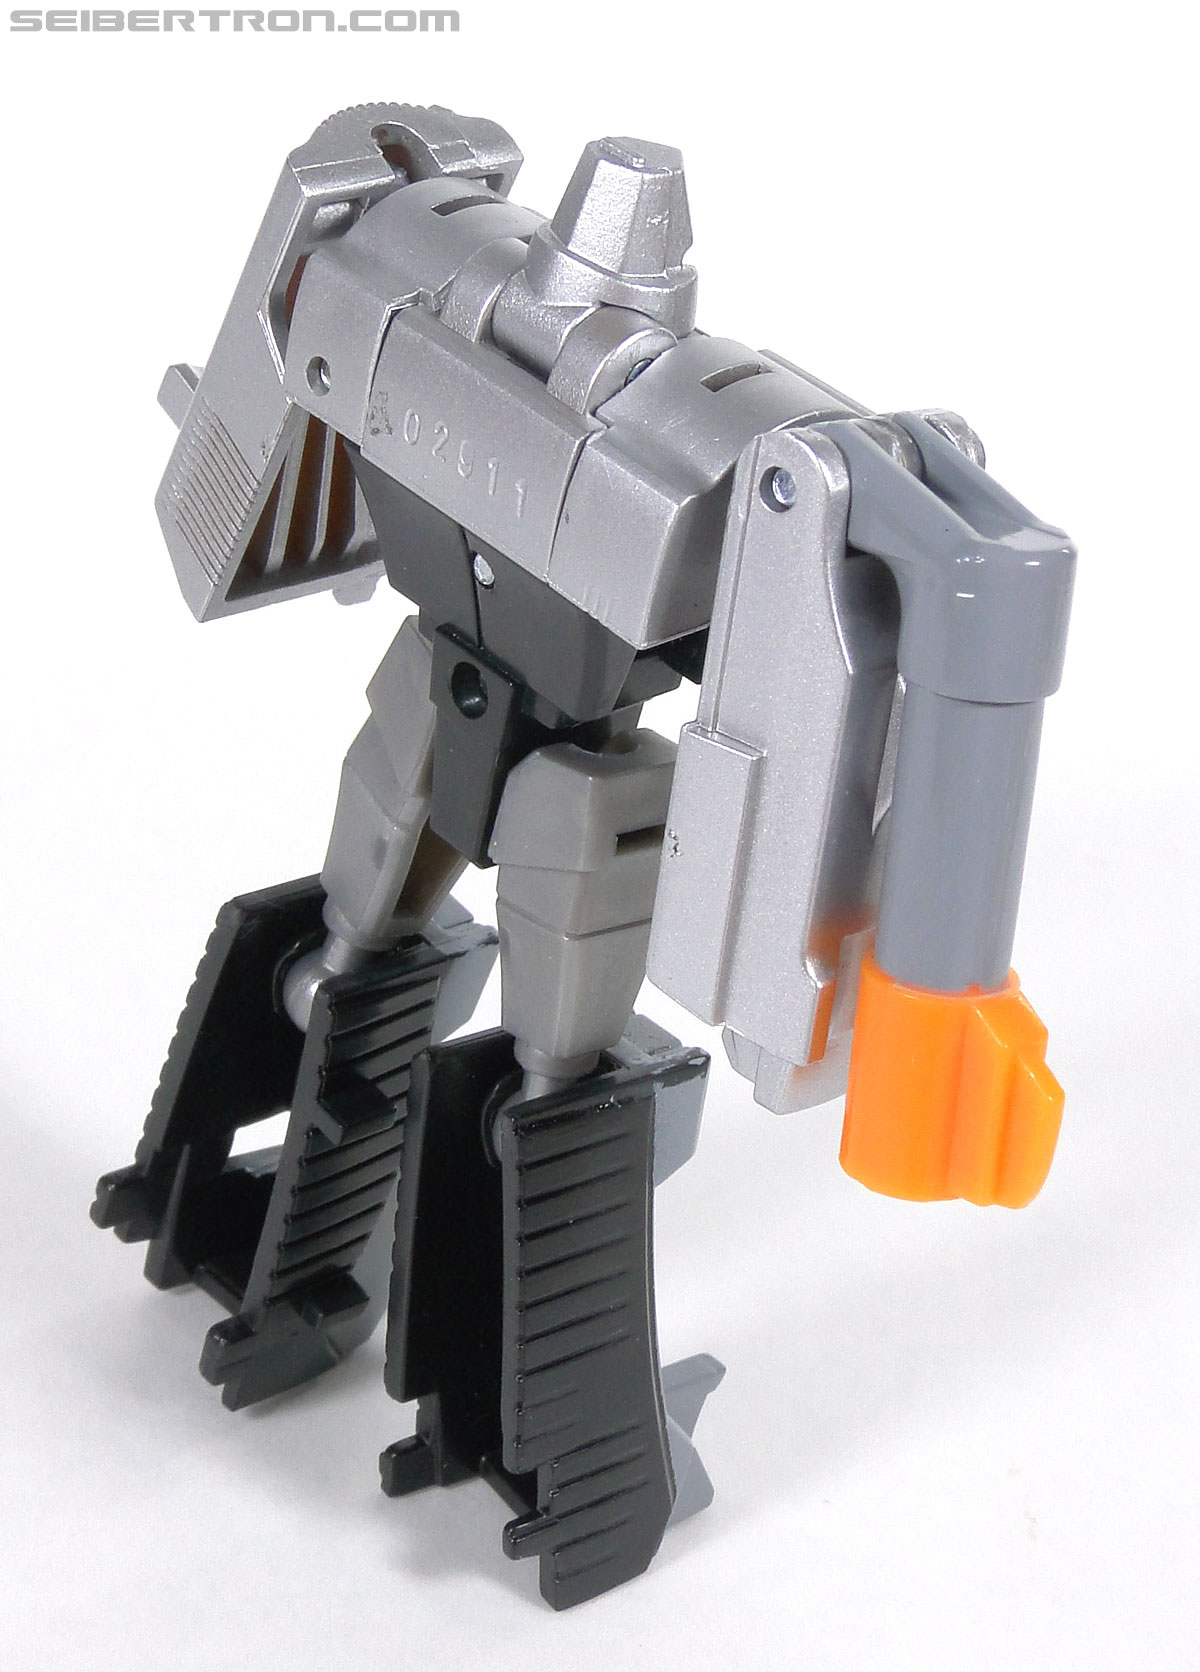 Transformers Reveal The Shield Megatron (Image #55 of 110)